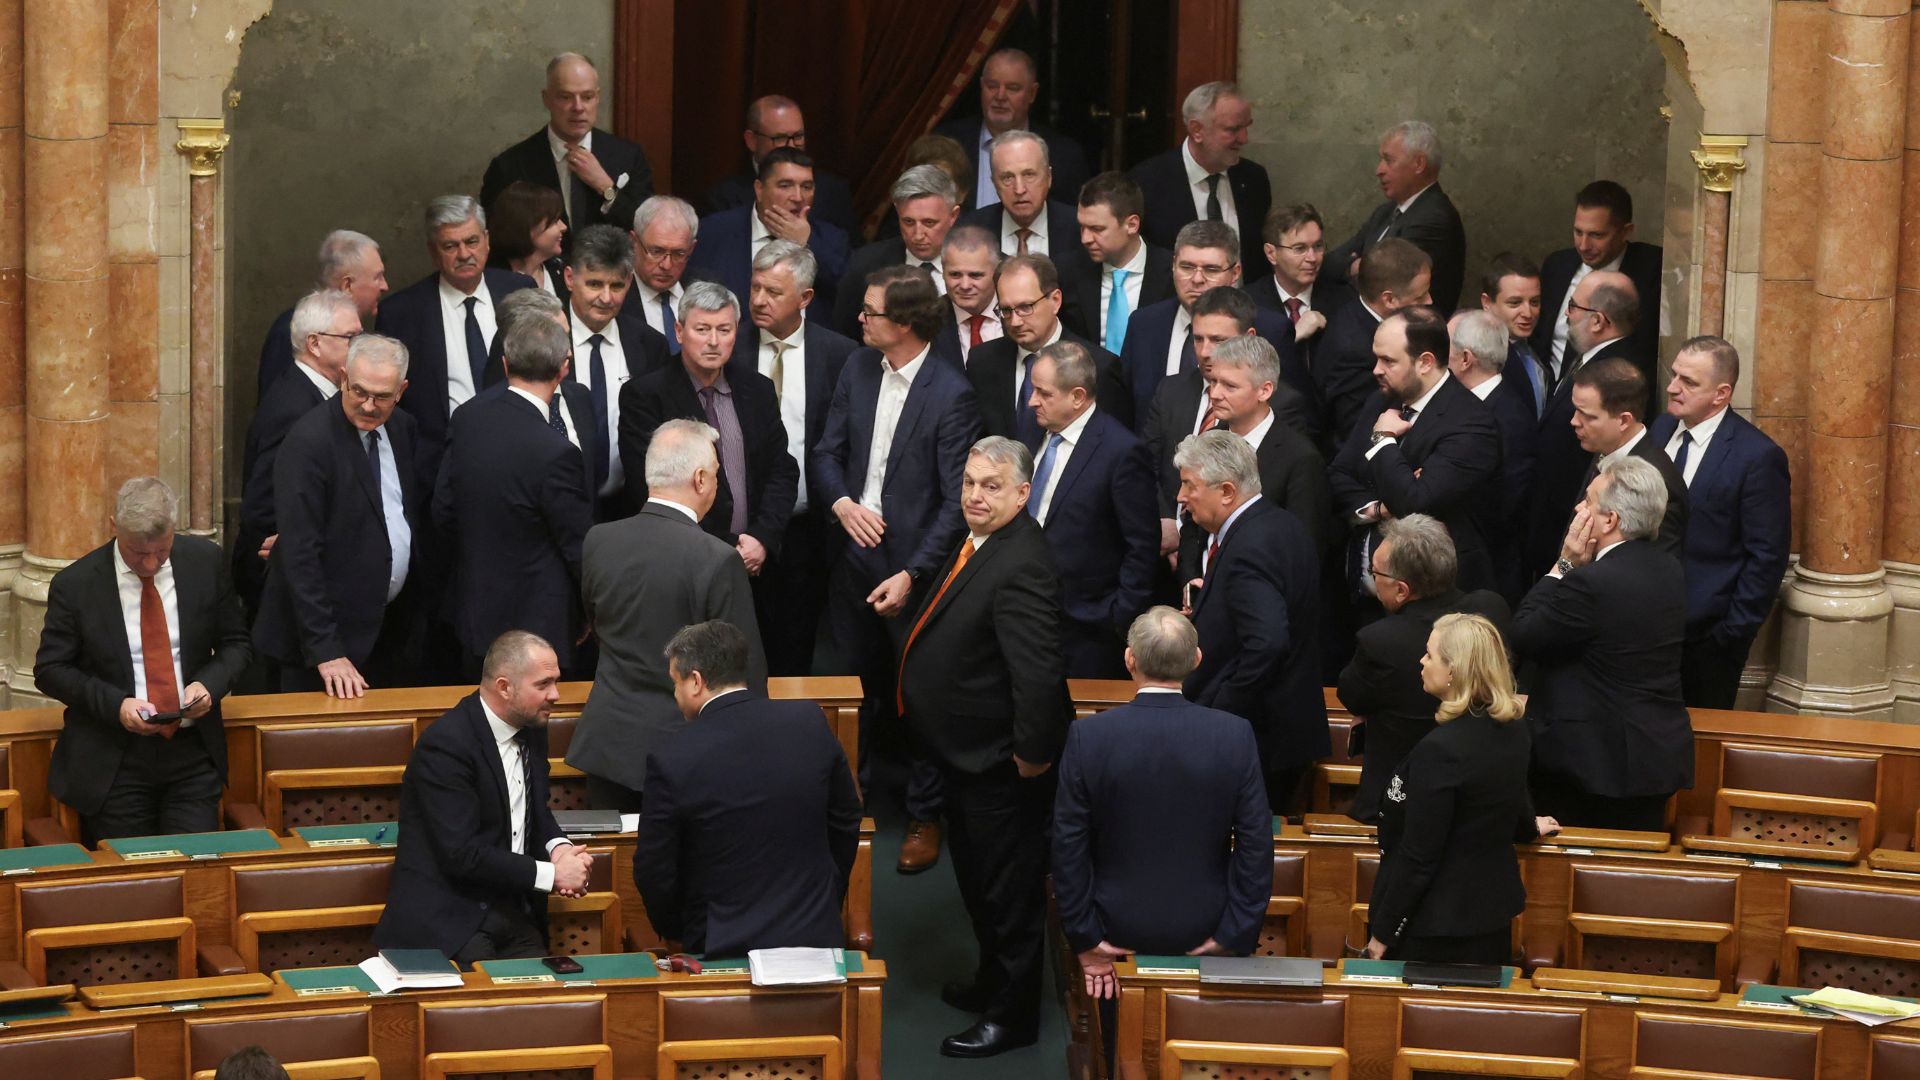 Hungarian Prime Minister Viktor Orban and members of the Fidesz party stand together during a break in parliament on Monday. /Bernadett Szabo/Reuters
